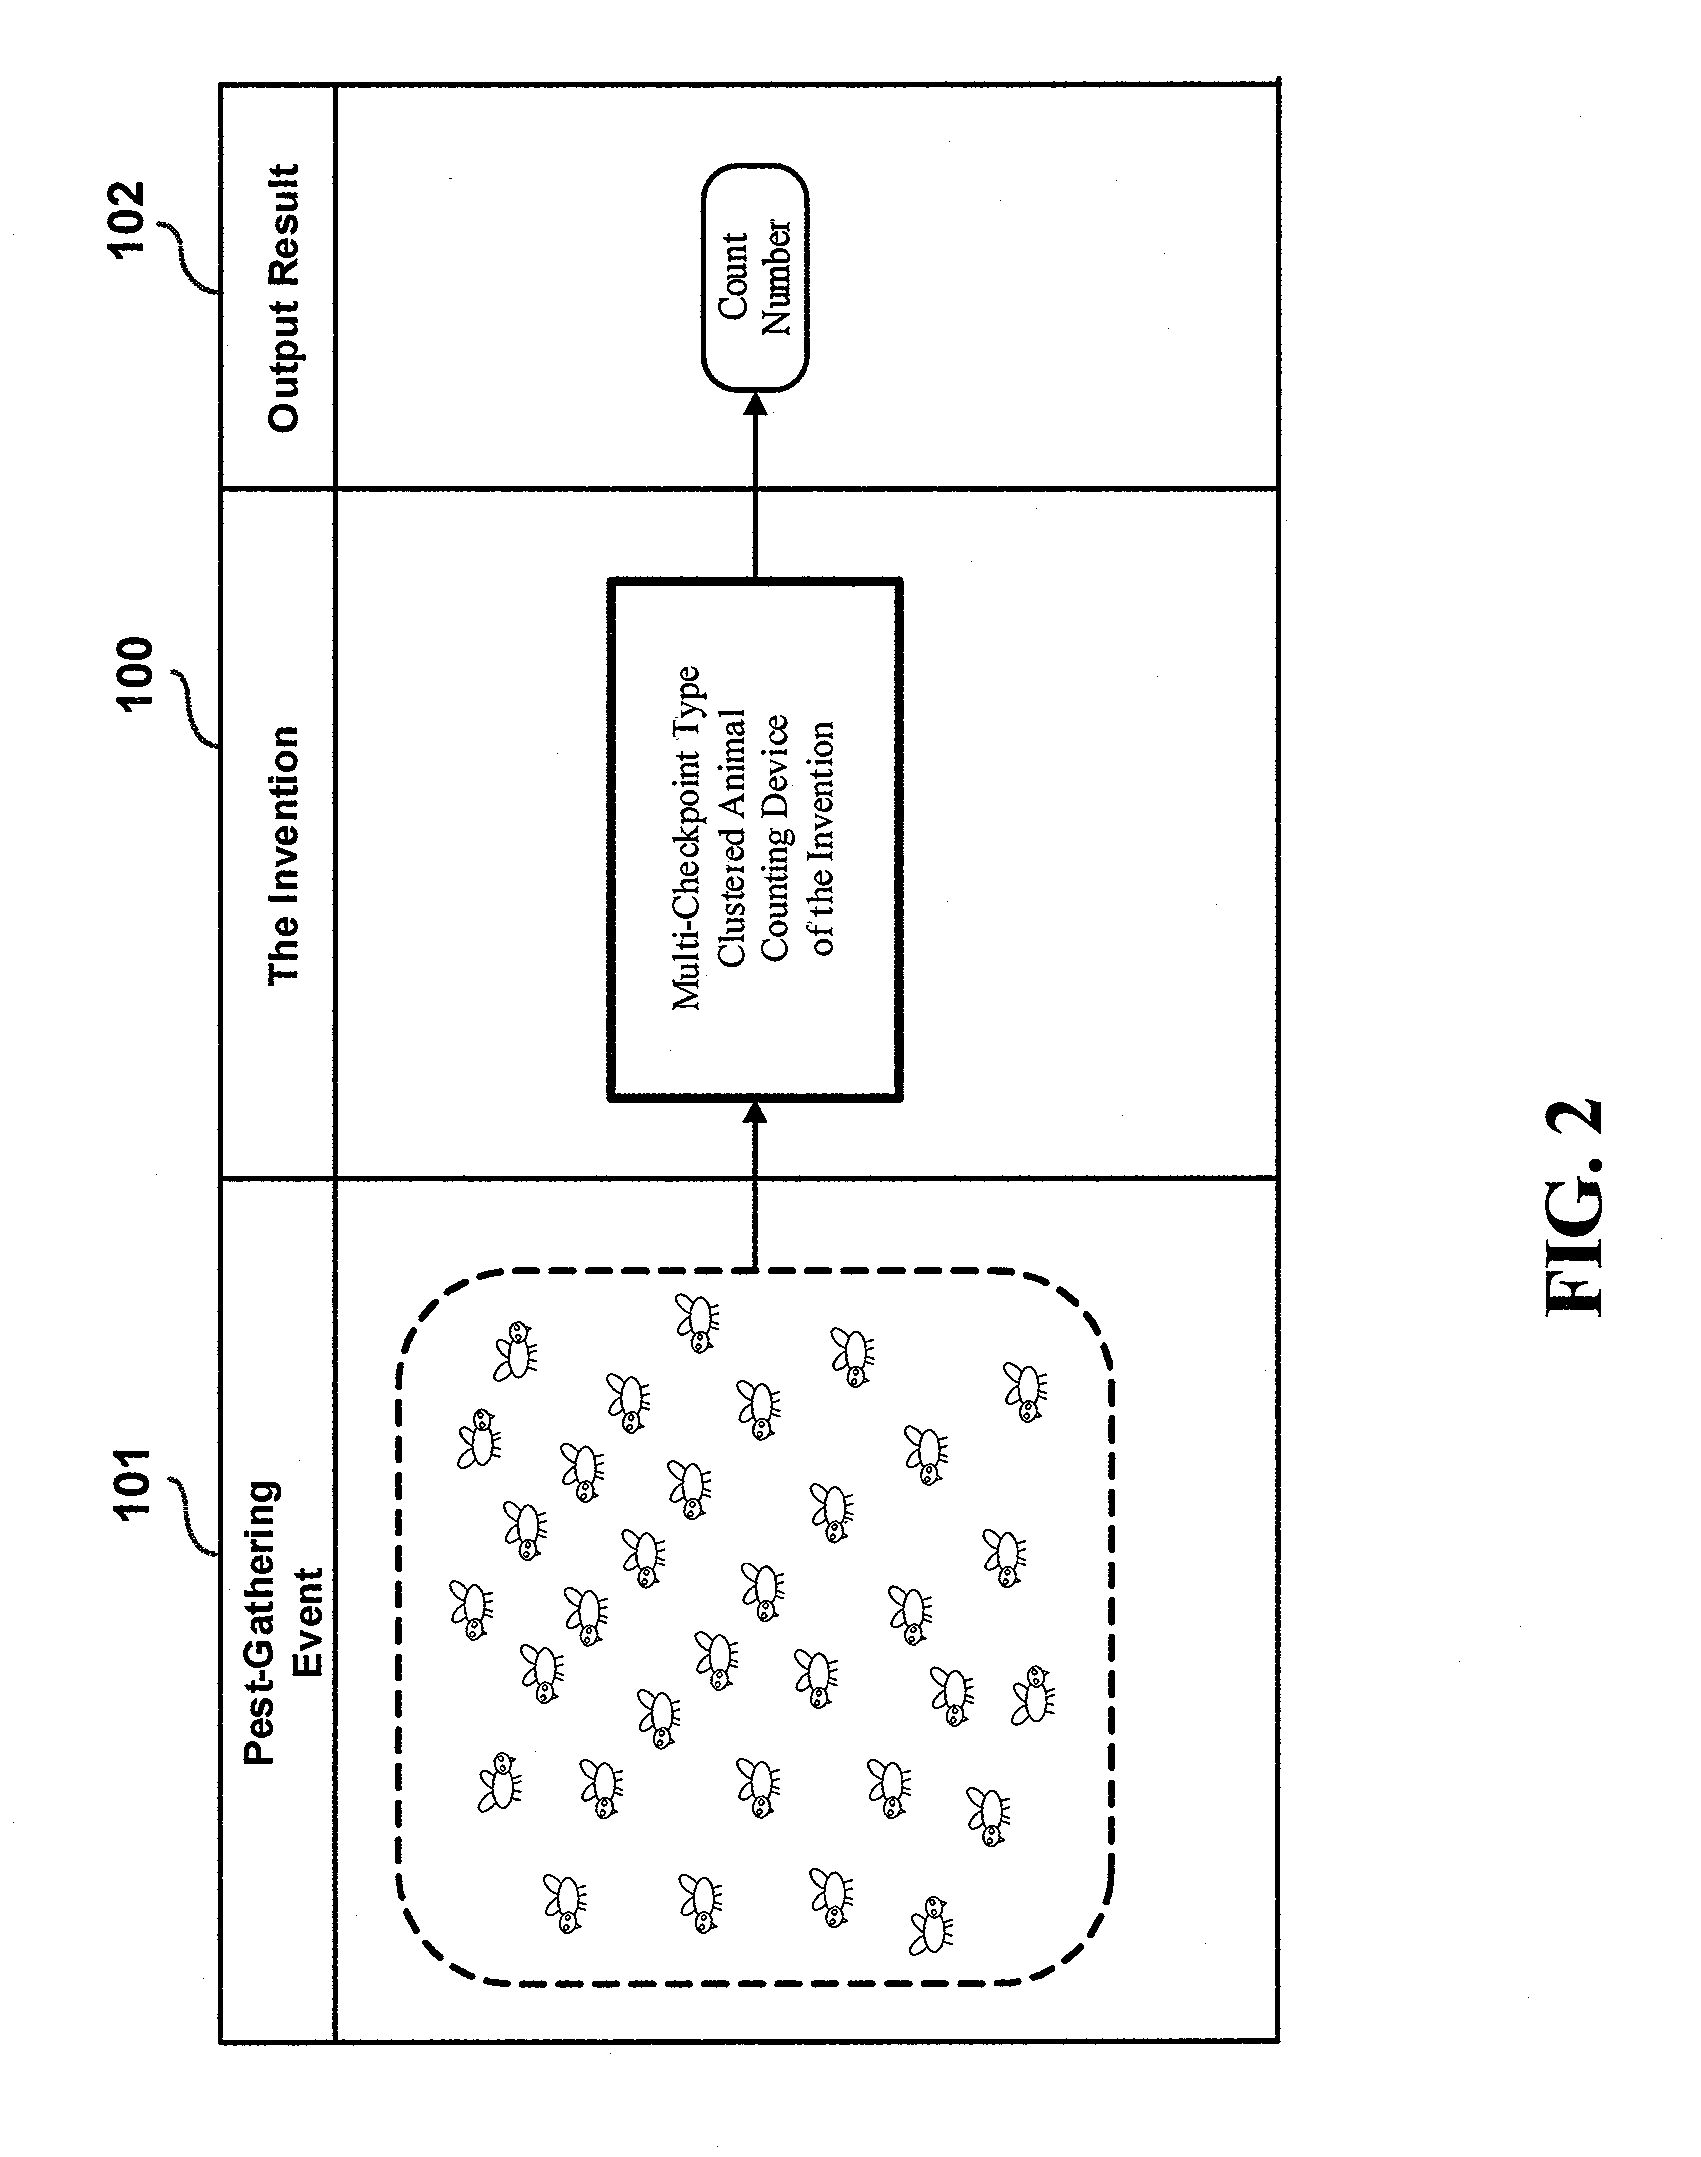 Multi-checkpoint type clustered animal counting device